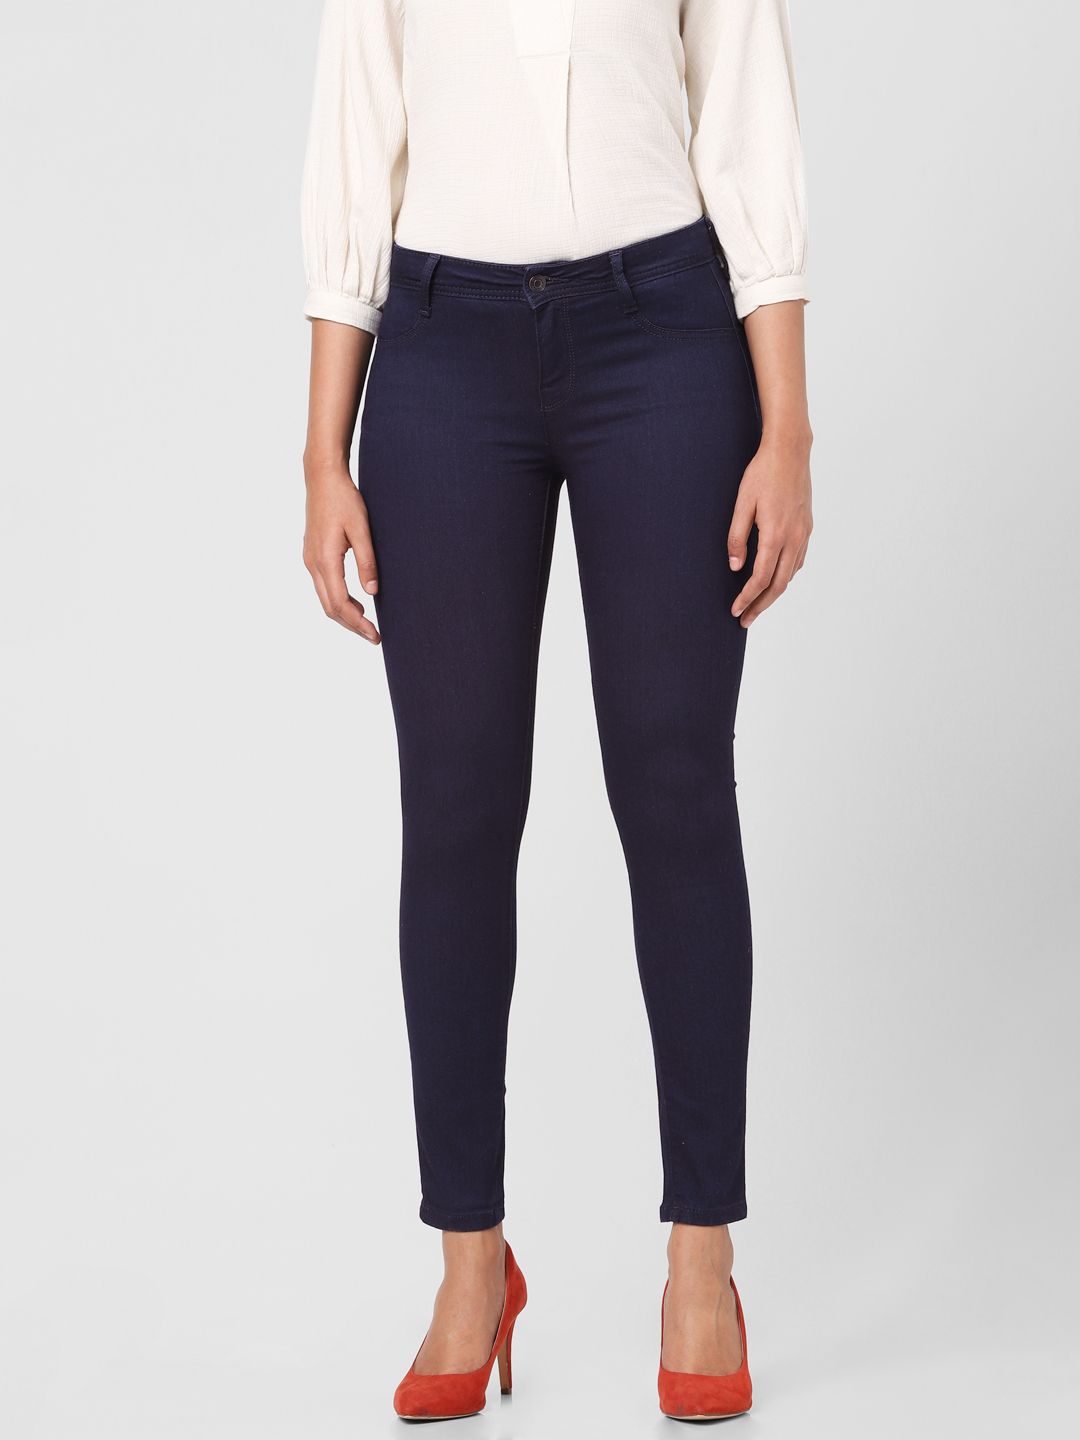 Vero Moda Women Blue Classic Skinny Fit High-Rise Ankle Length Stretchable Jeans Price in India